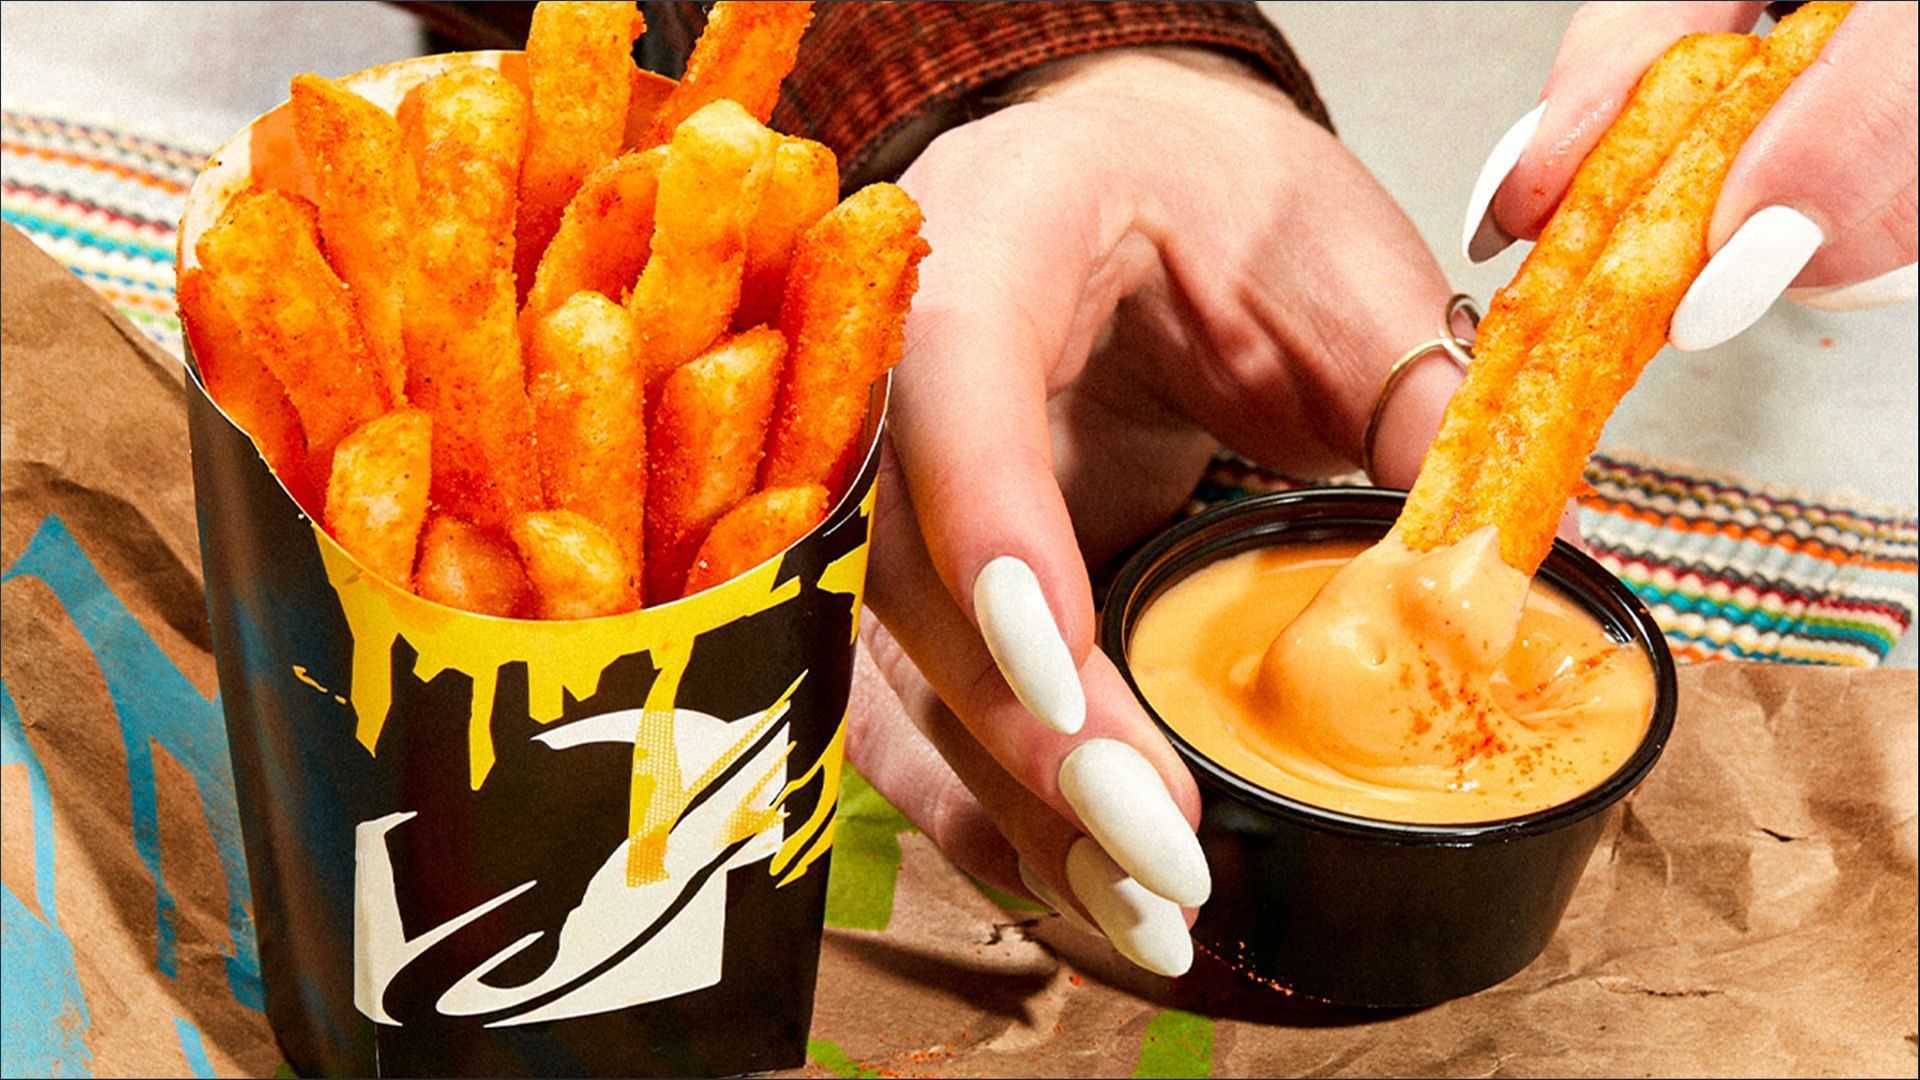 Taco Bell introduces new Nacho Fries with Vegan Cheese Sauce which will be on the menu next month (Image via Taco Bell)